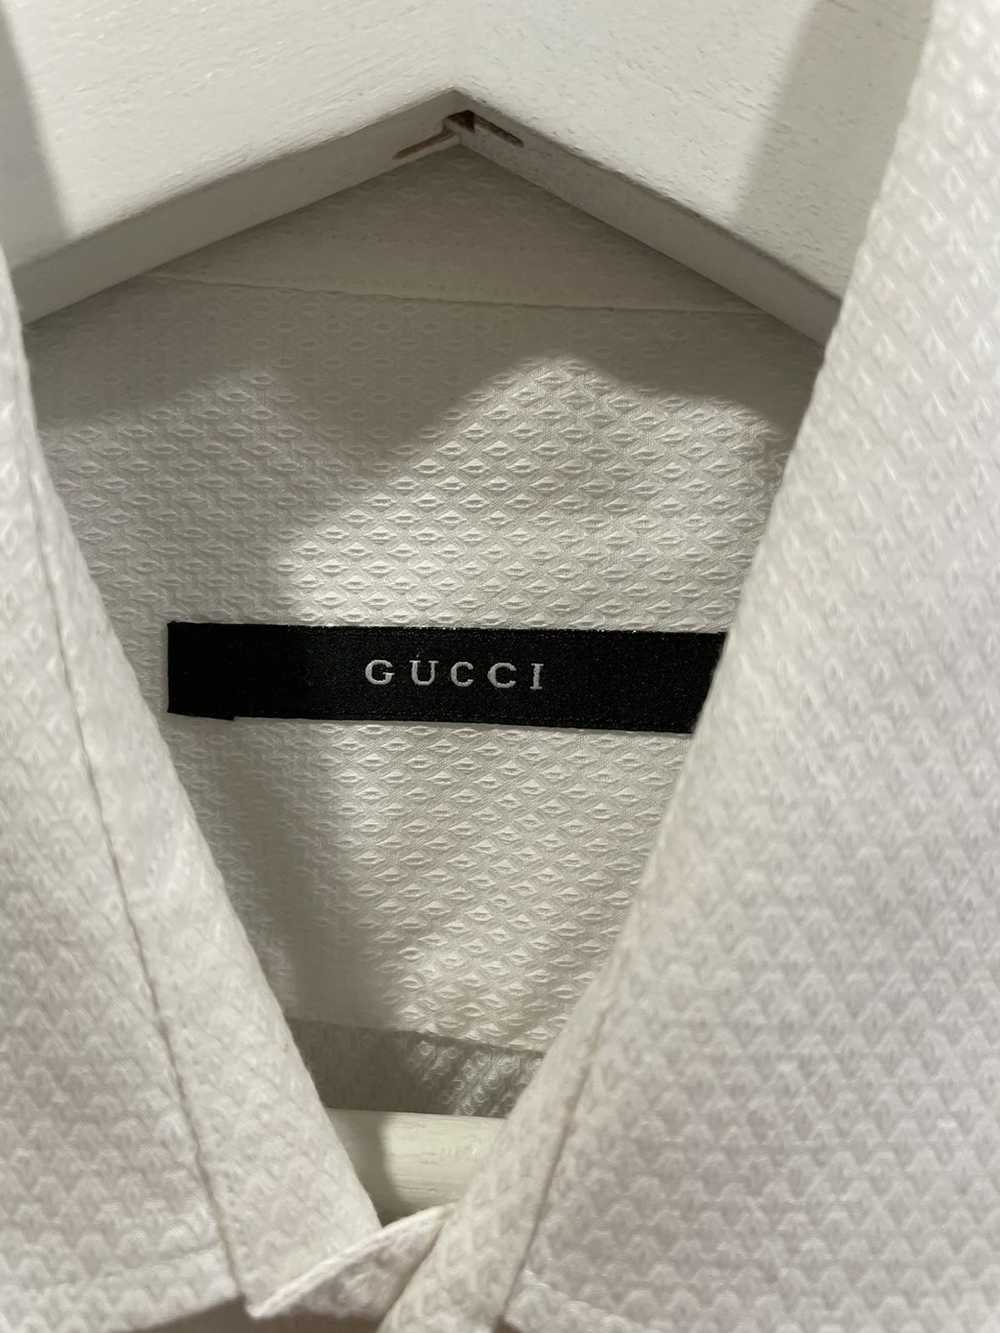 Gucci French cuff button up - image 2